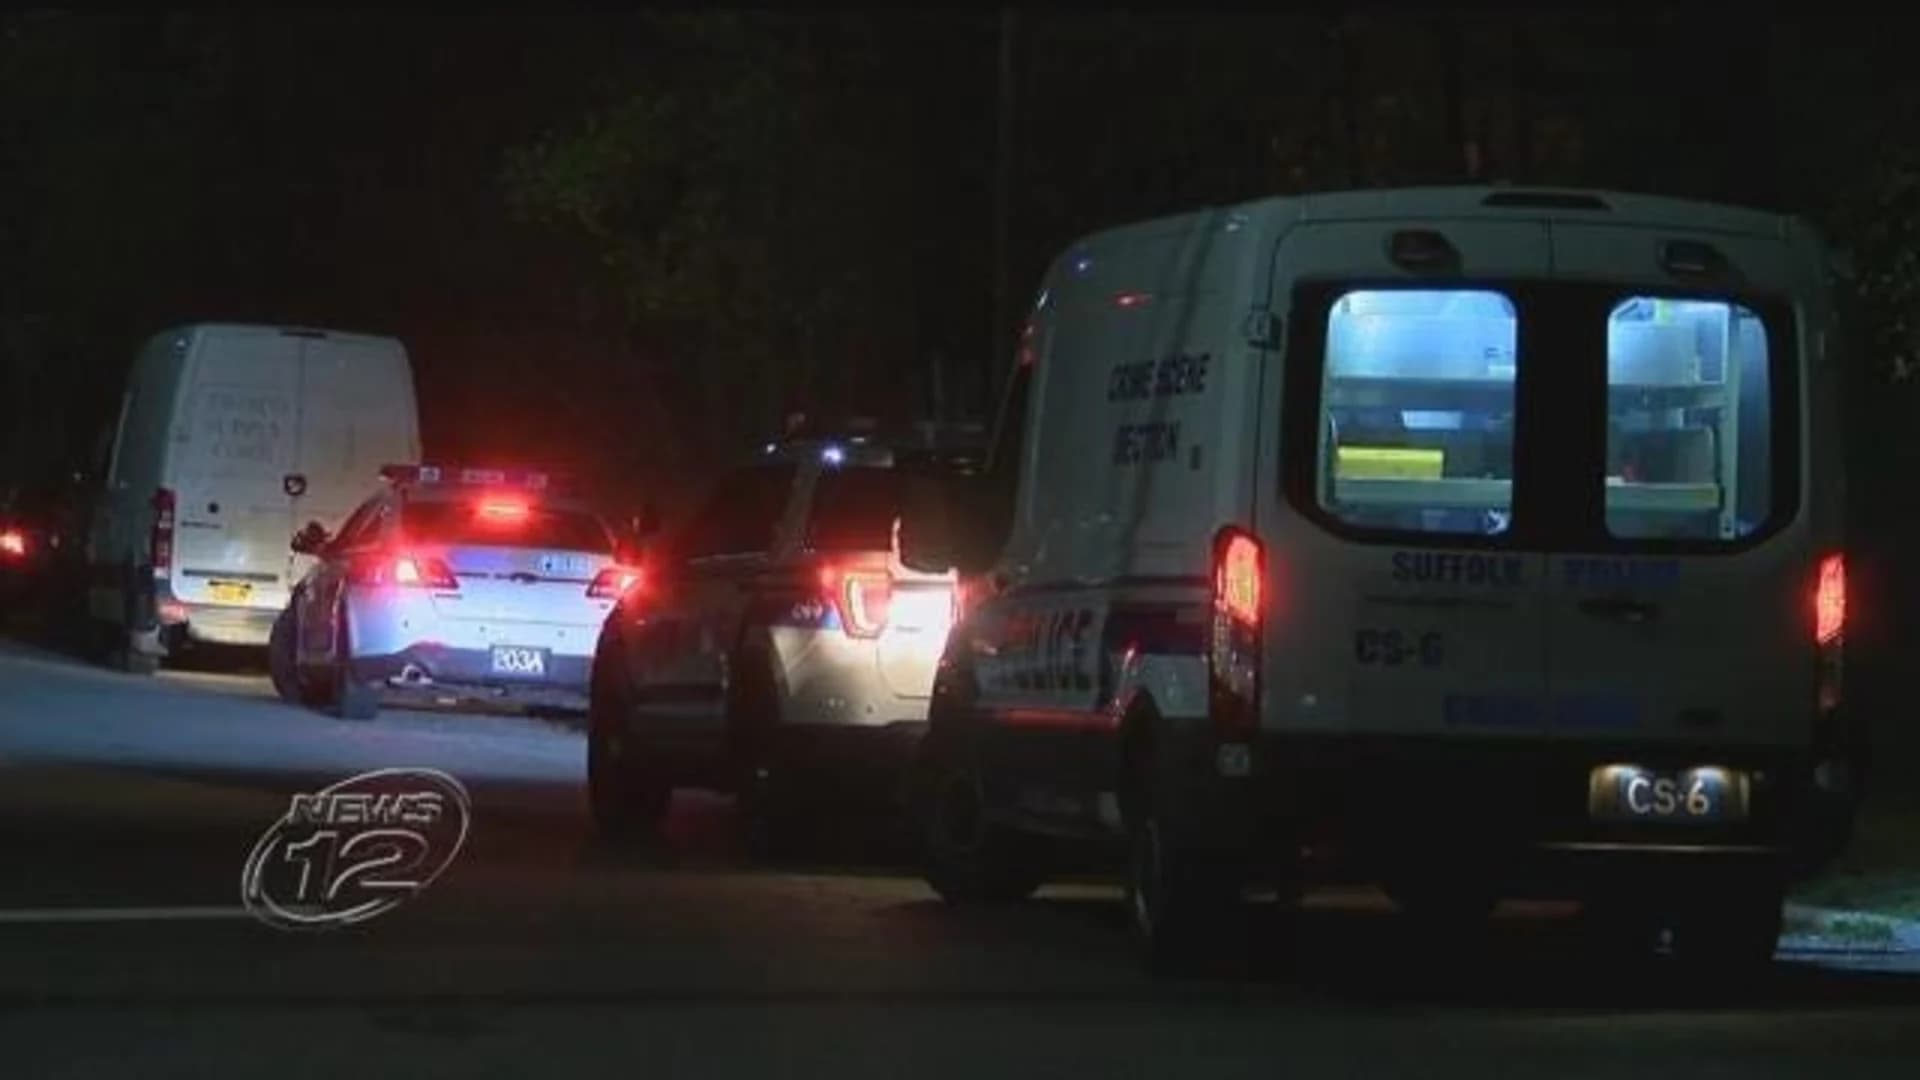 Police: Trio stabs 16-year-old boy in Huntington Station